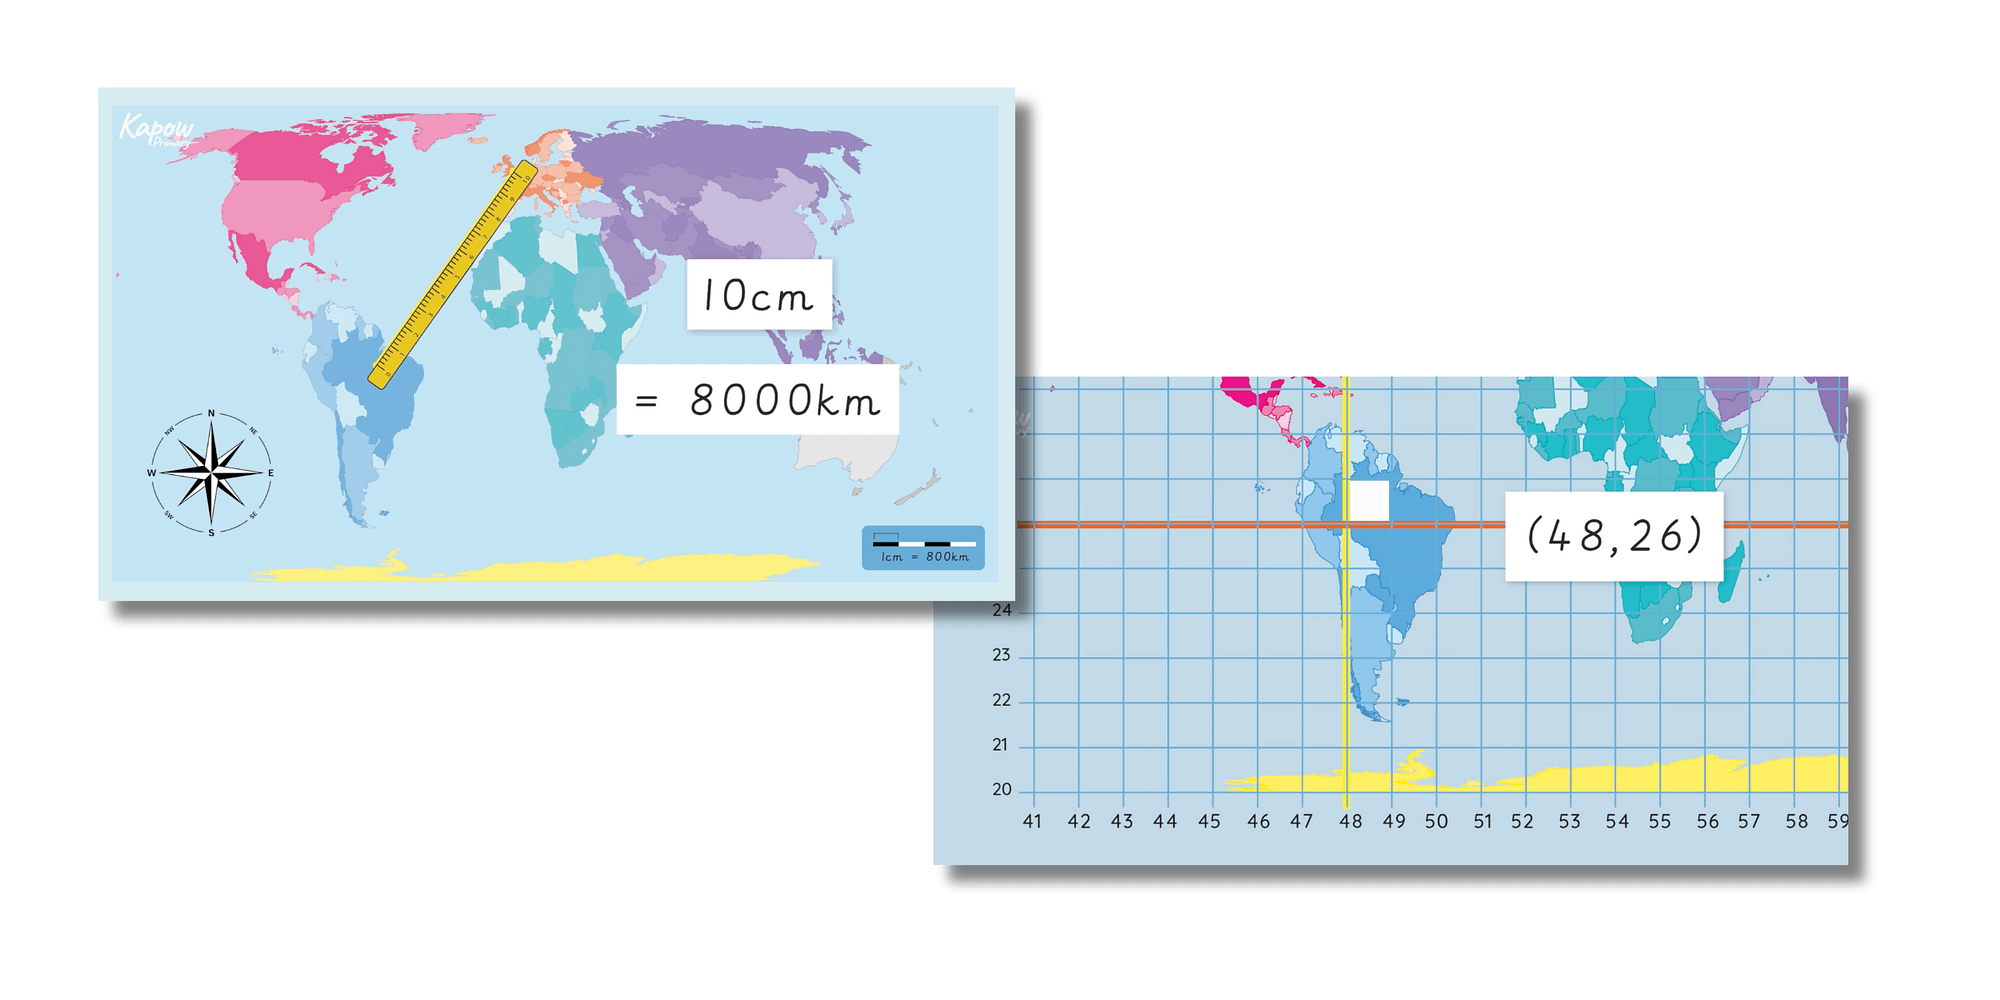 Video examples to support geographical skills such as grid references and scale bars